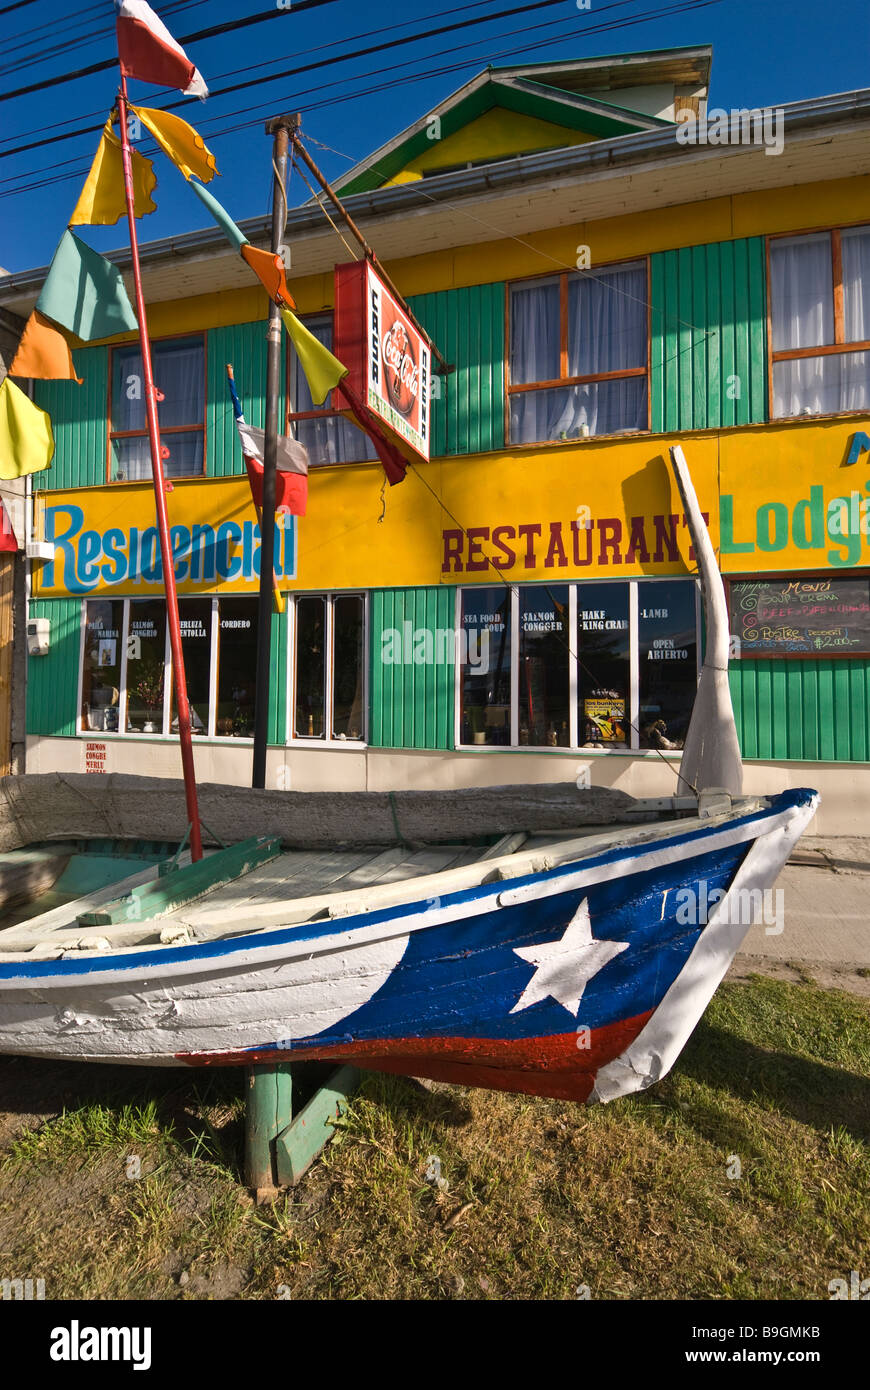 Elk198 4218v Chile Patagonia Puerto Natales restaurant with boat Stock Photo